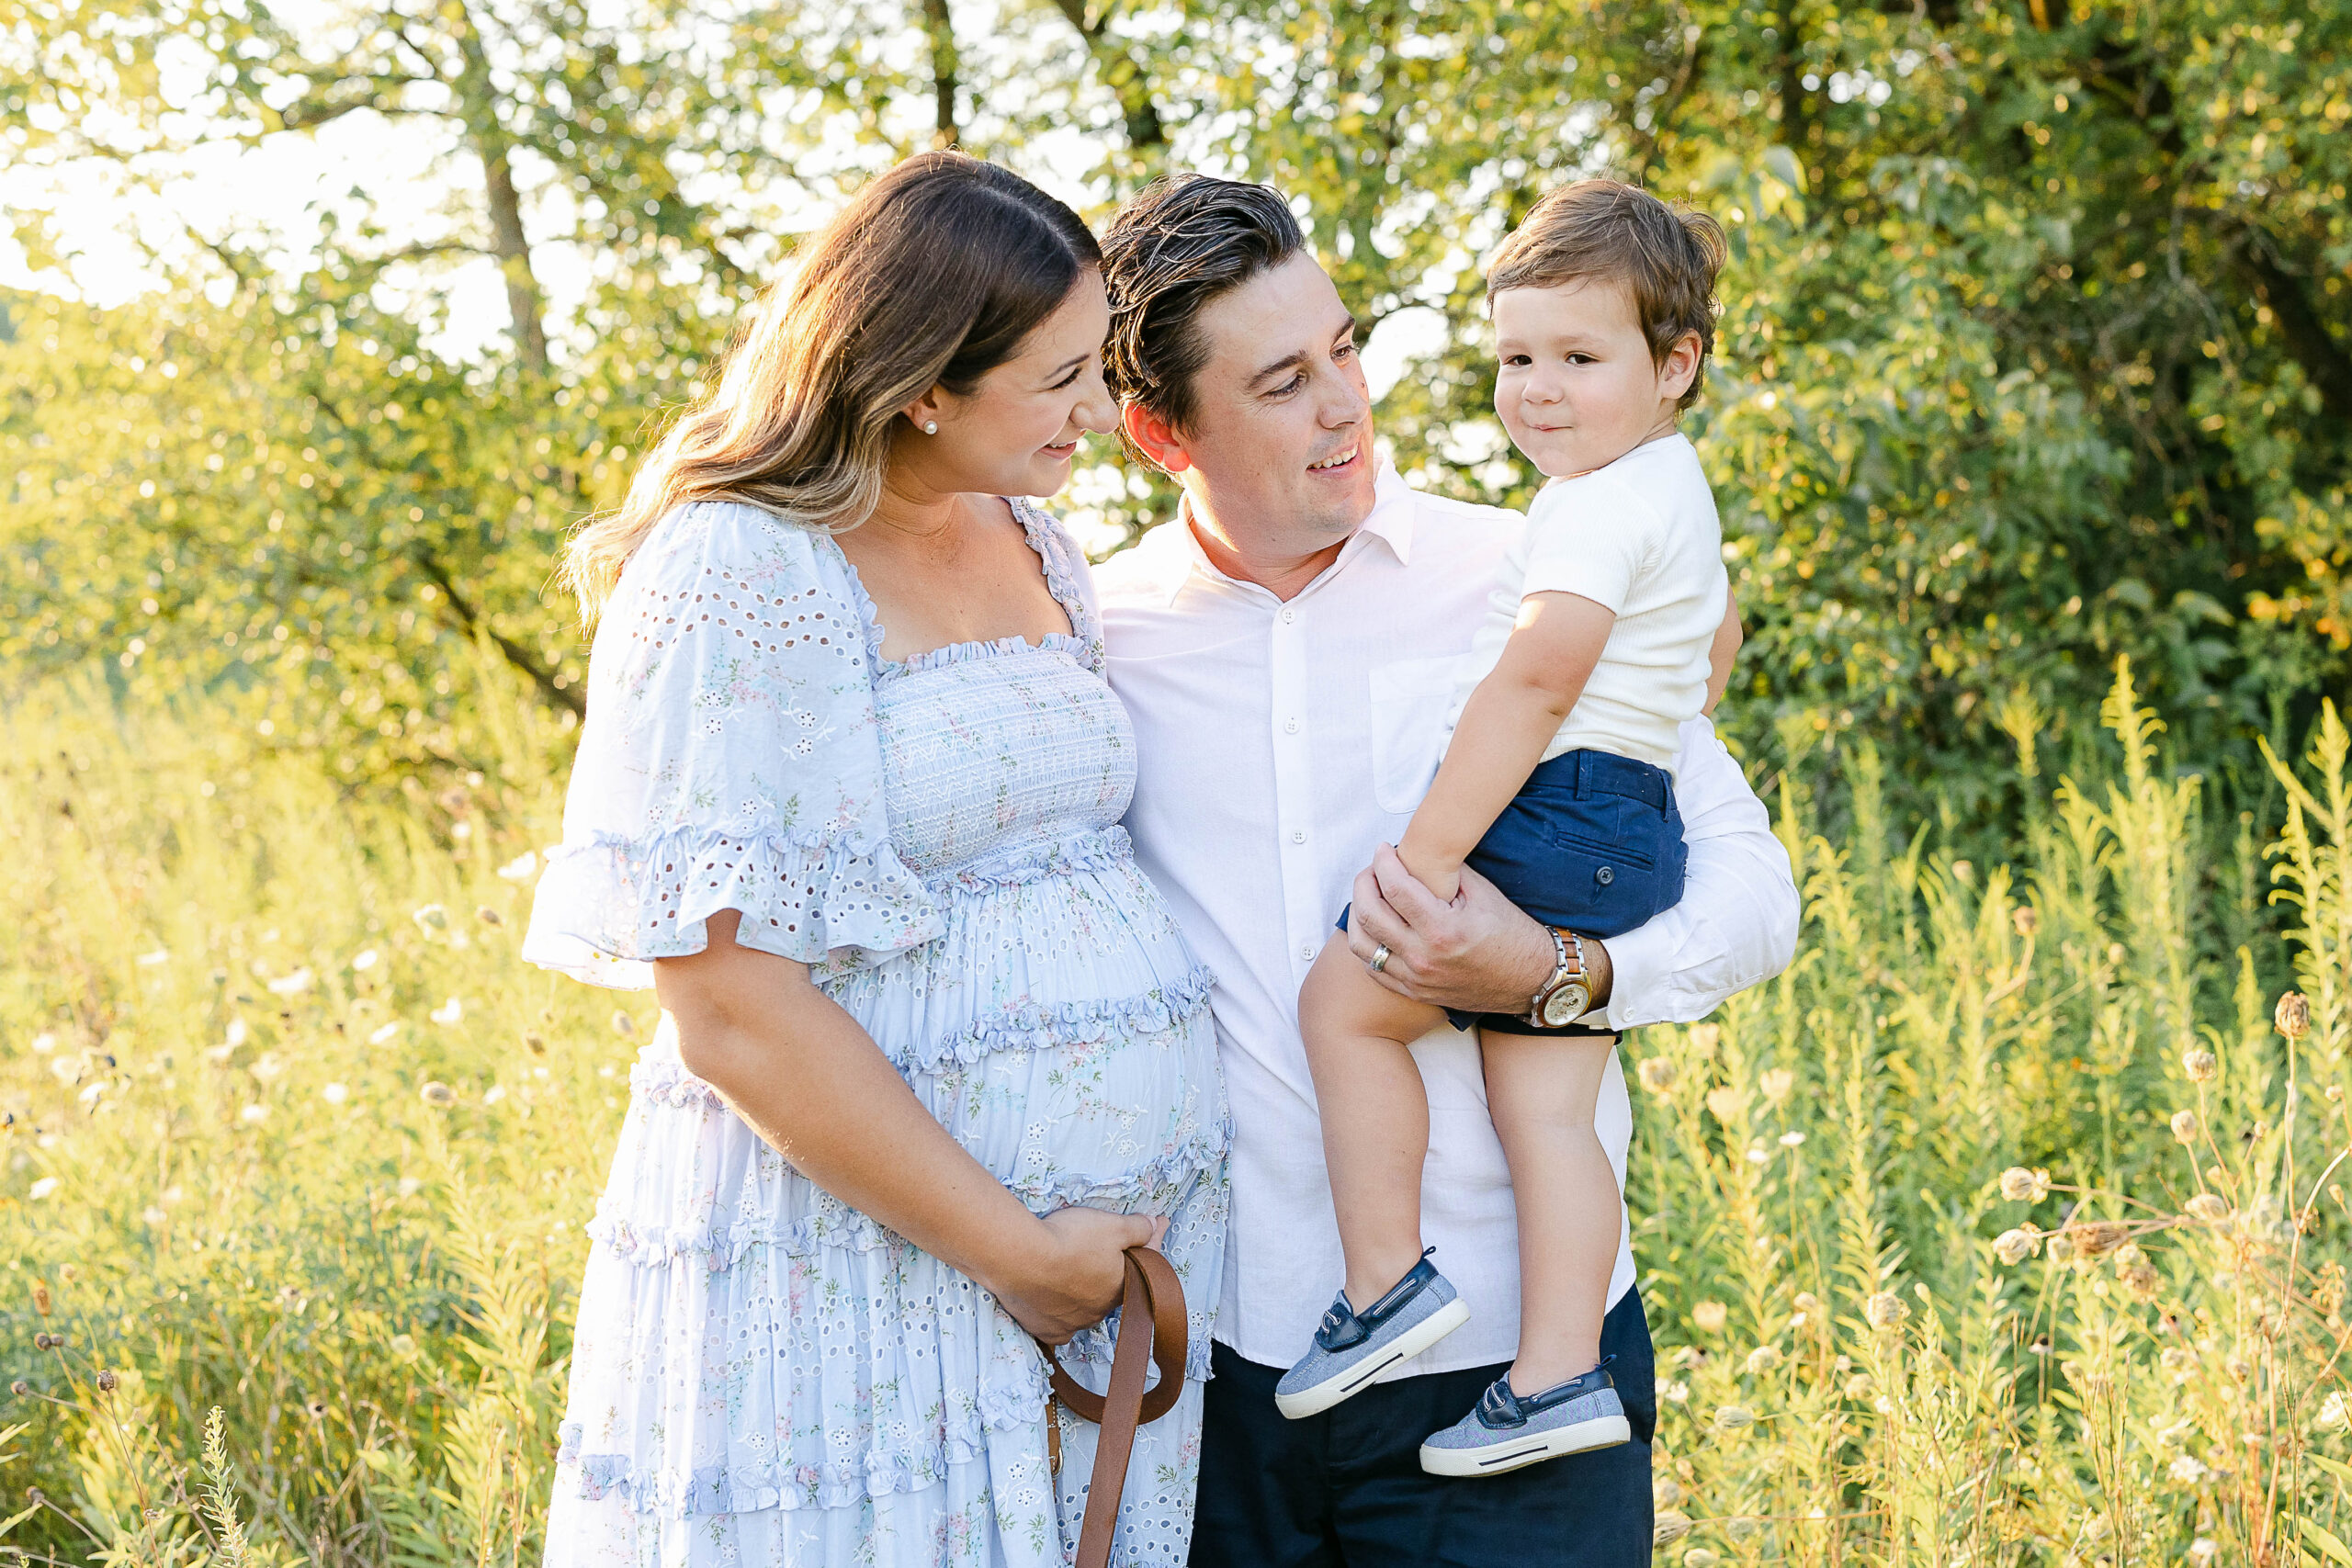 Should you include children and pets in your maternity session